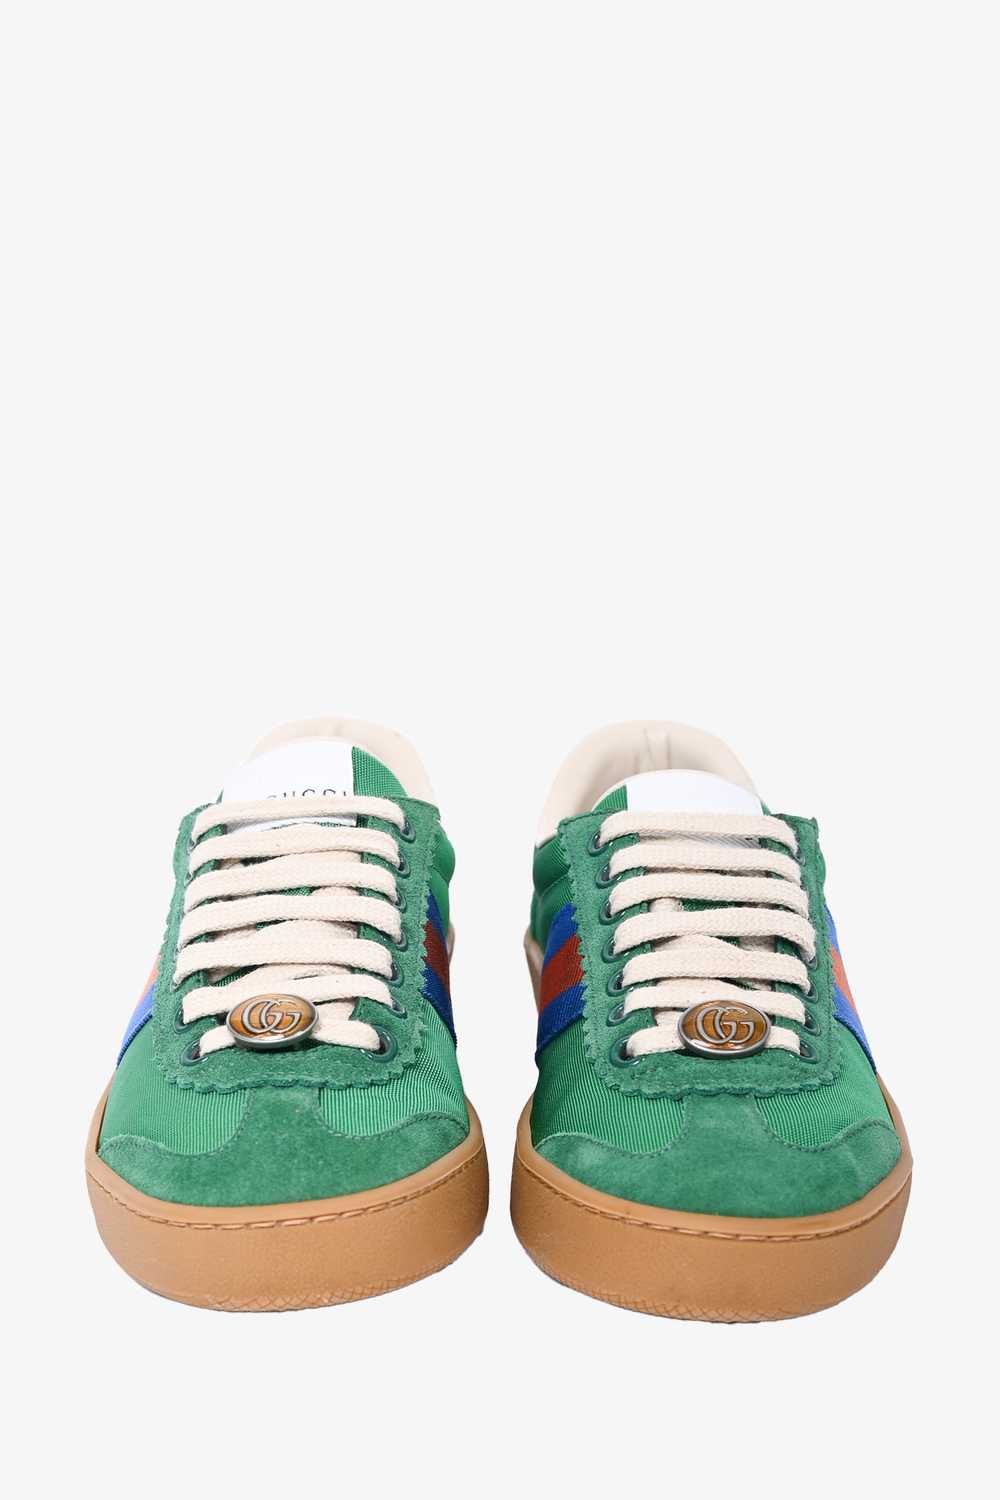 Gucci Green Web Accent Sneakers Size 35 - image 3